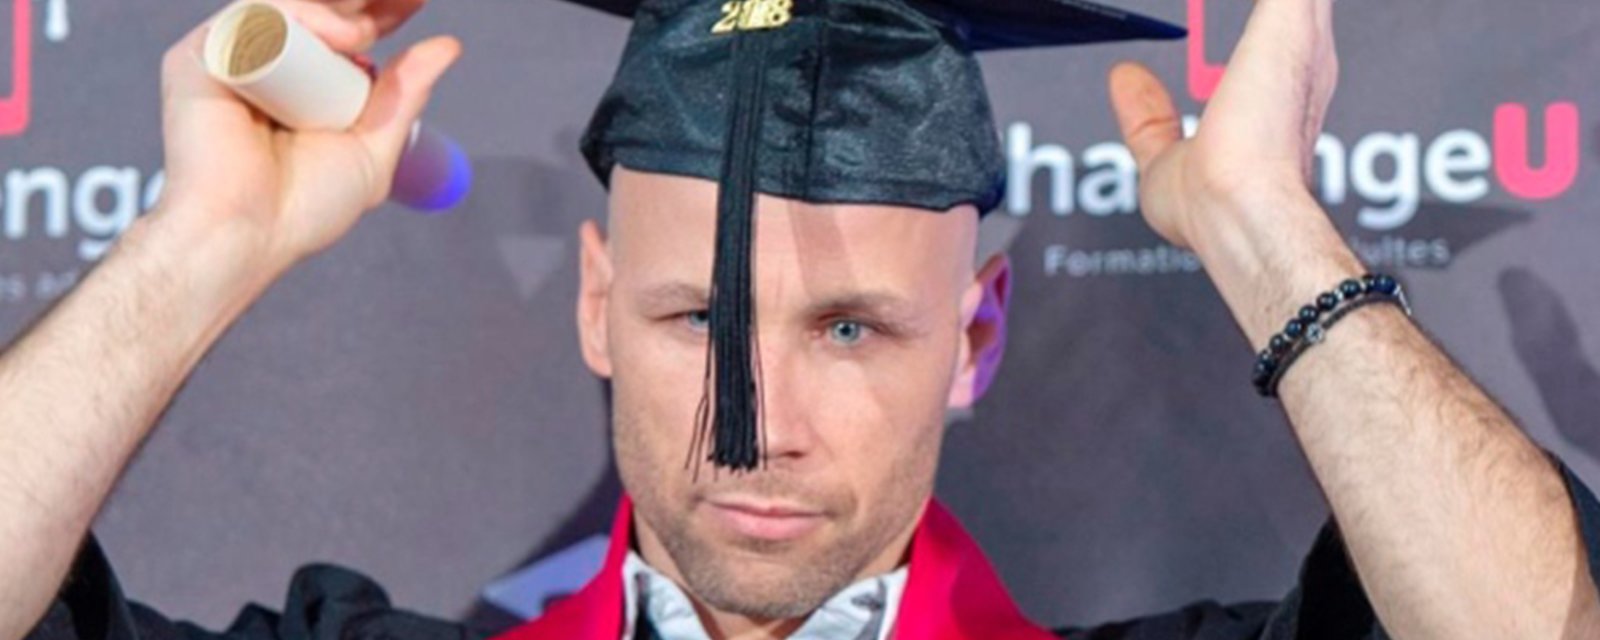 Retired NHLer challenged by UFC legend Georges St. Pierre to graduate high school 22 years after dropping out